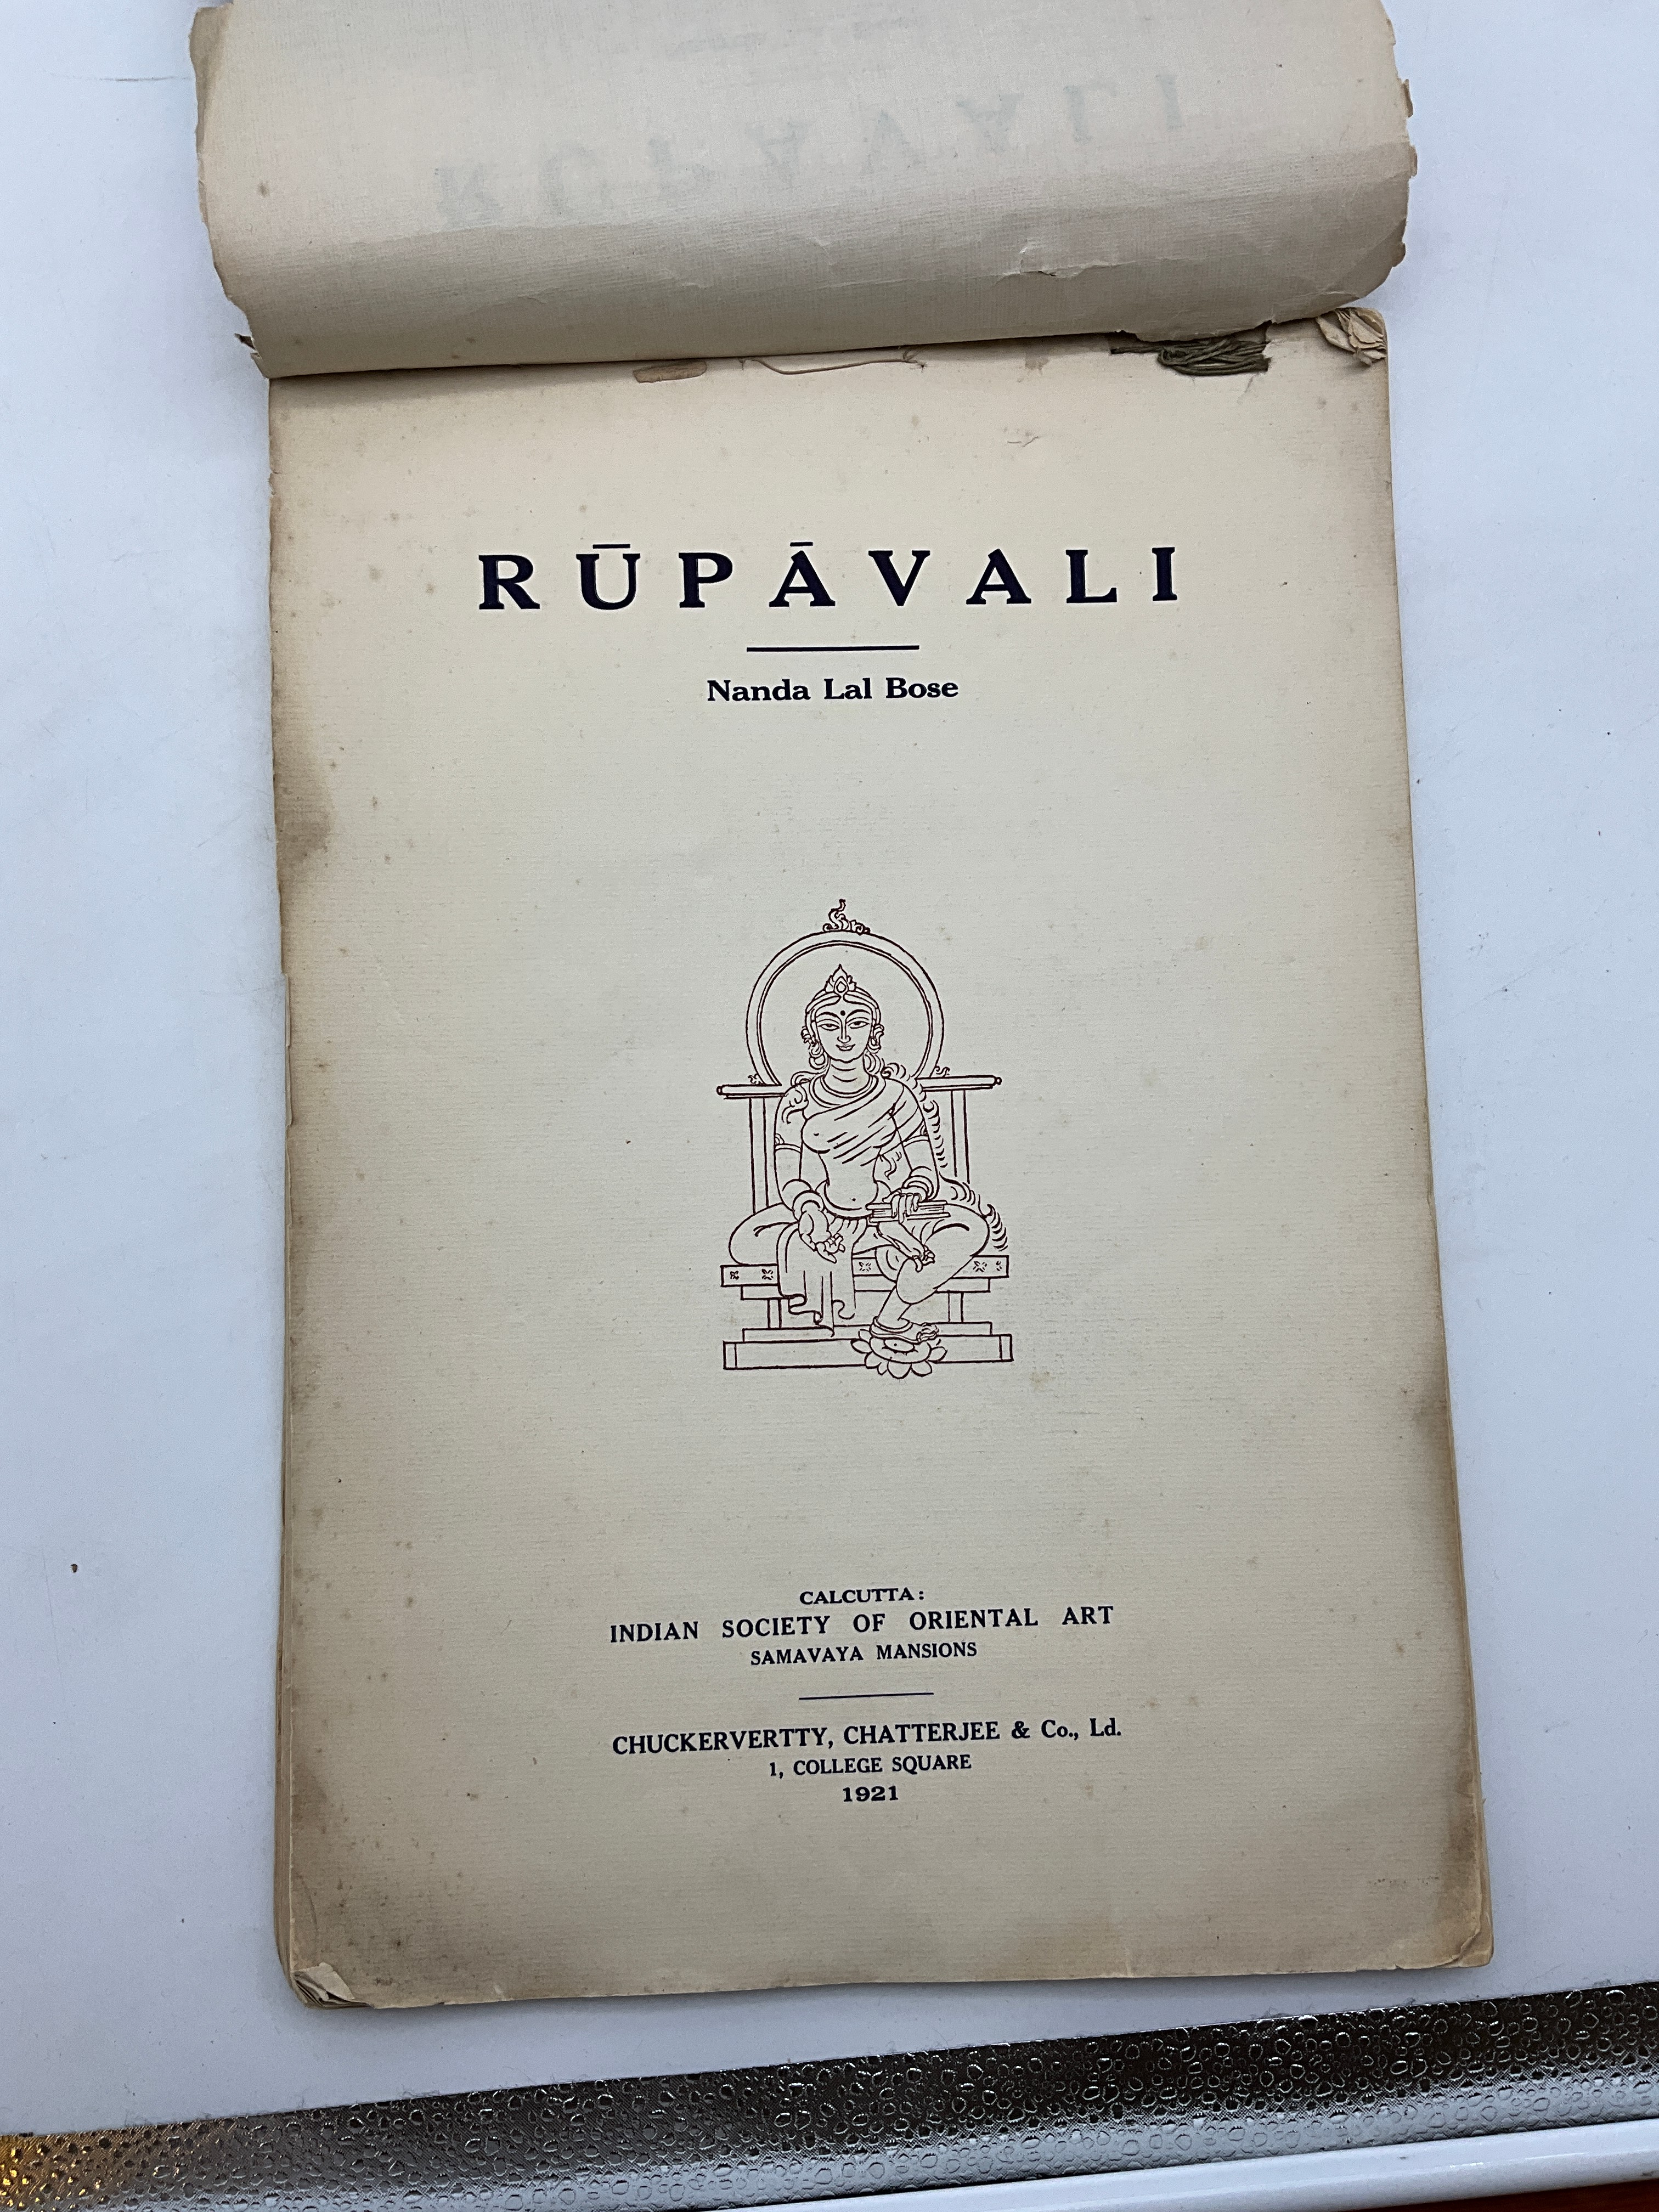 RUPAVALI BY NANDA LAI BOSE PUBLISHED BY INDIAN SOCIETY OF ORIENTAL ART 1921 A/F - Image 2 of 7